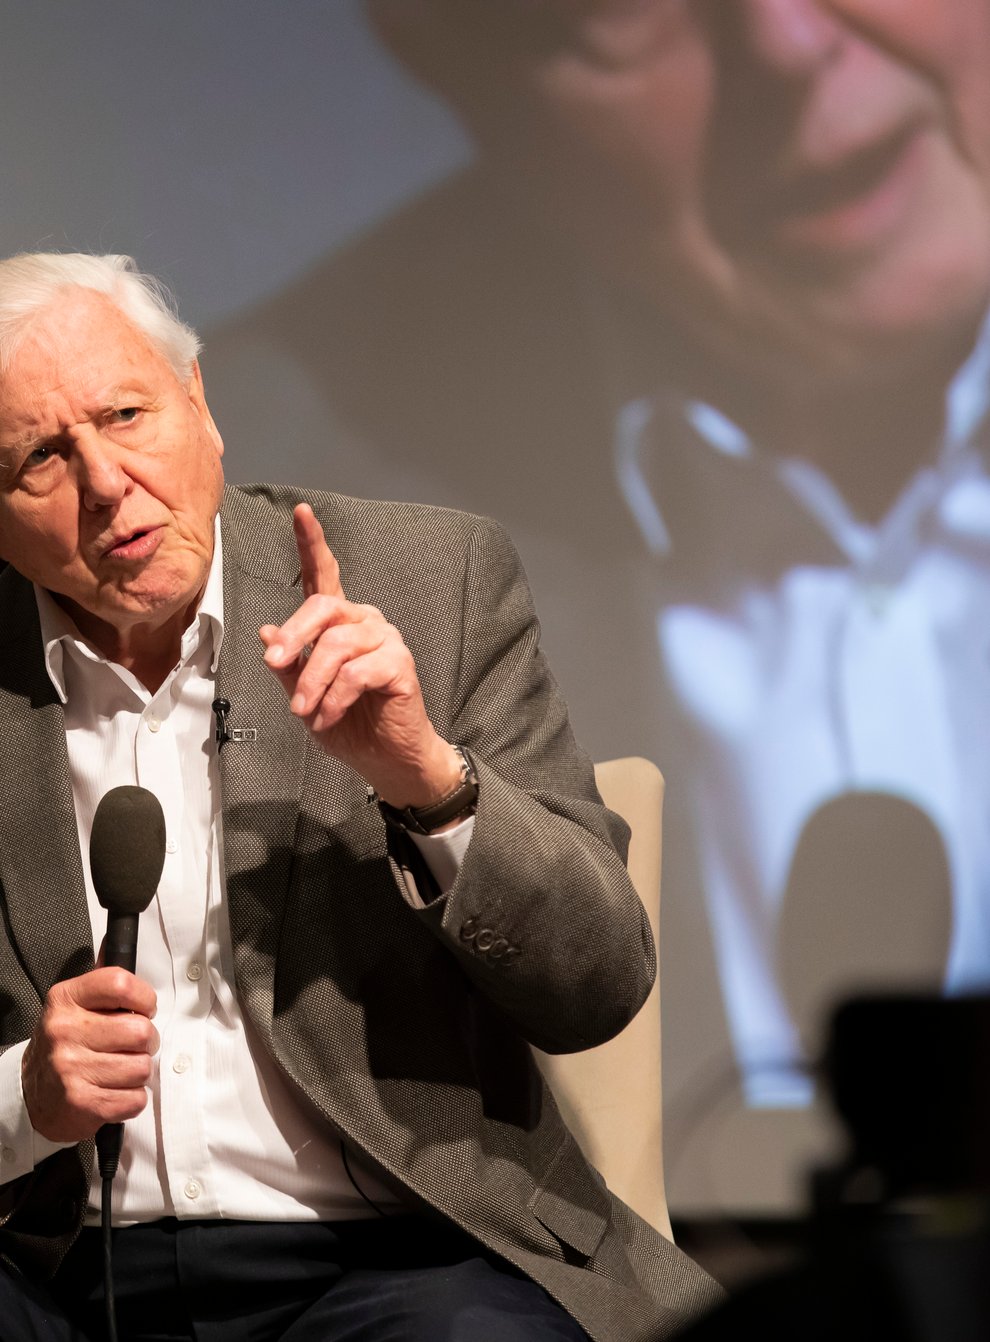 <p>As landmark BBC series A Perfect Planet prepares to air this New Year, we learn more from broadcasting veteran Sir David Attenborough</p>